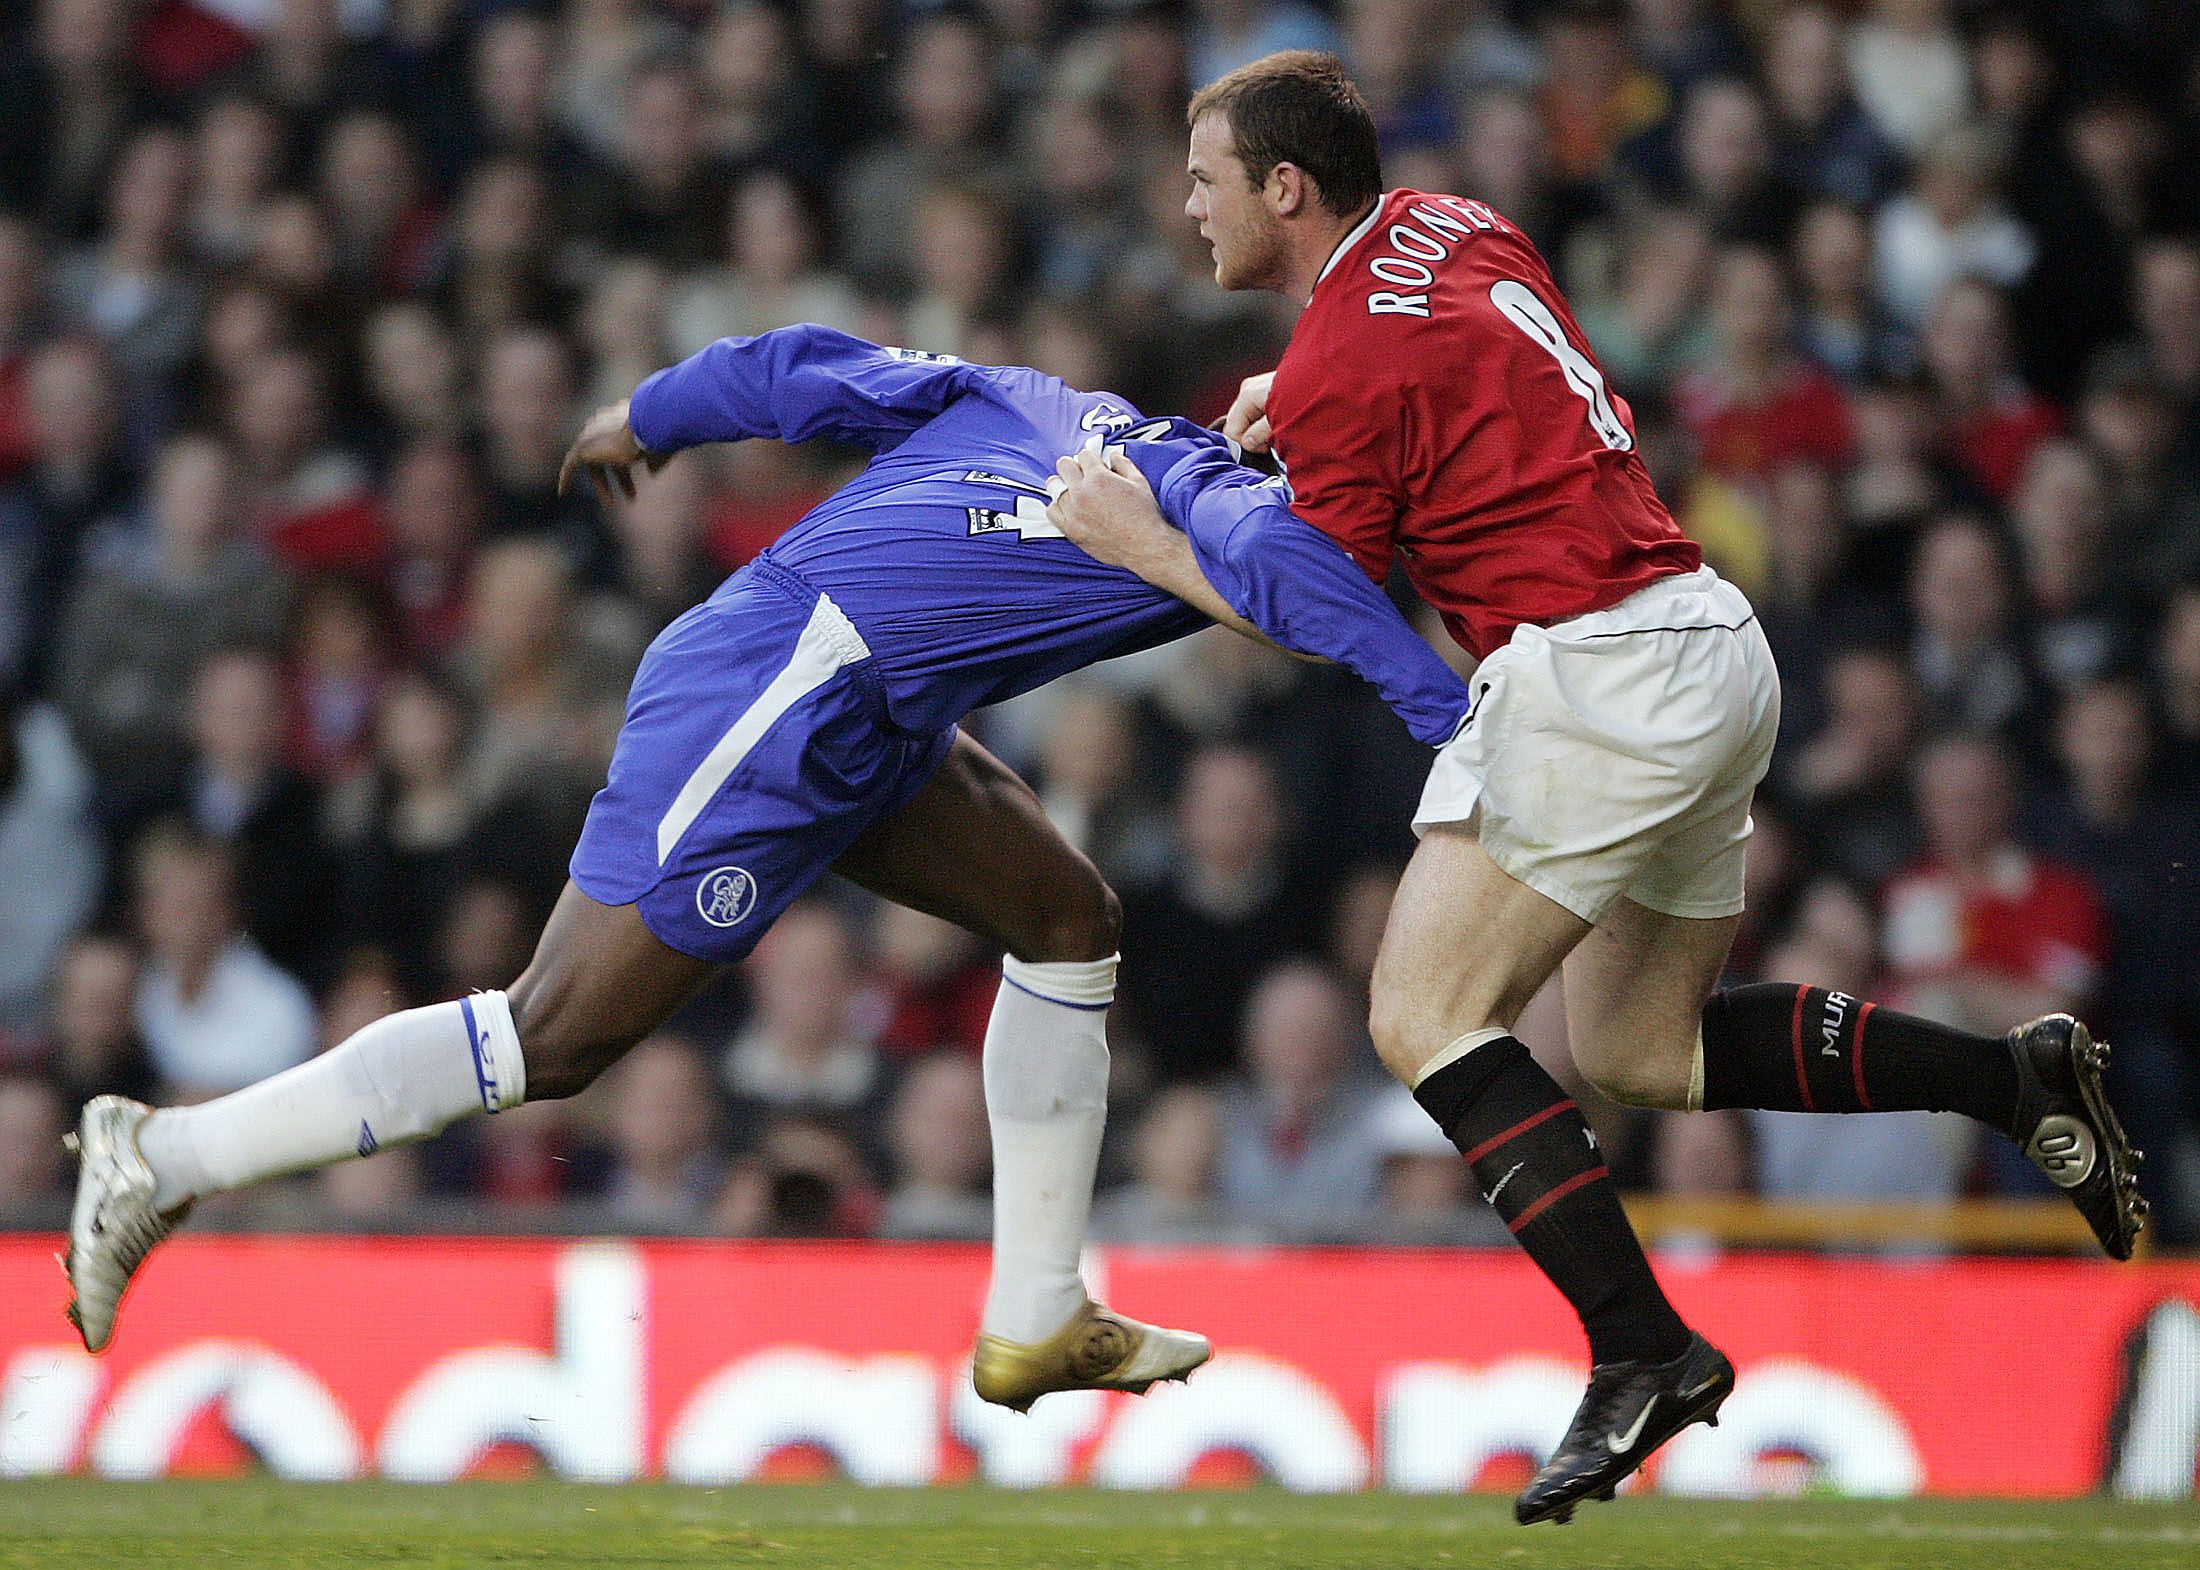 Manchester United's Wayne Rooney (R) tussles with Chelsea's Geremi during a Premier League soccer match at Old Trafford in Manchester May 10, 2005. NO ONLINE/INTERNET USE WITHOUT A LICENCE FROM THE FOOTBALL DATA CO LTD. FOR LICENCE ENQUIRIES PLEASE TELEPHONE +44 207 298 1656. REUTERS/Ian Hodgson  ih/YH